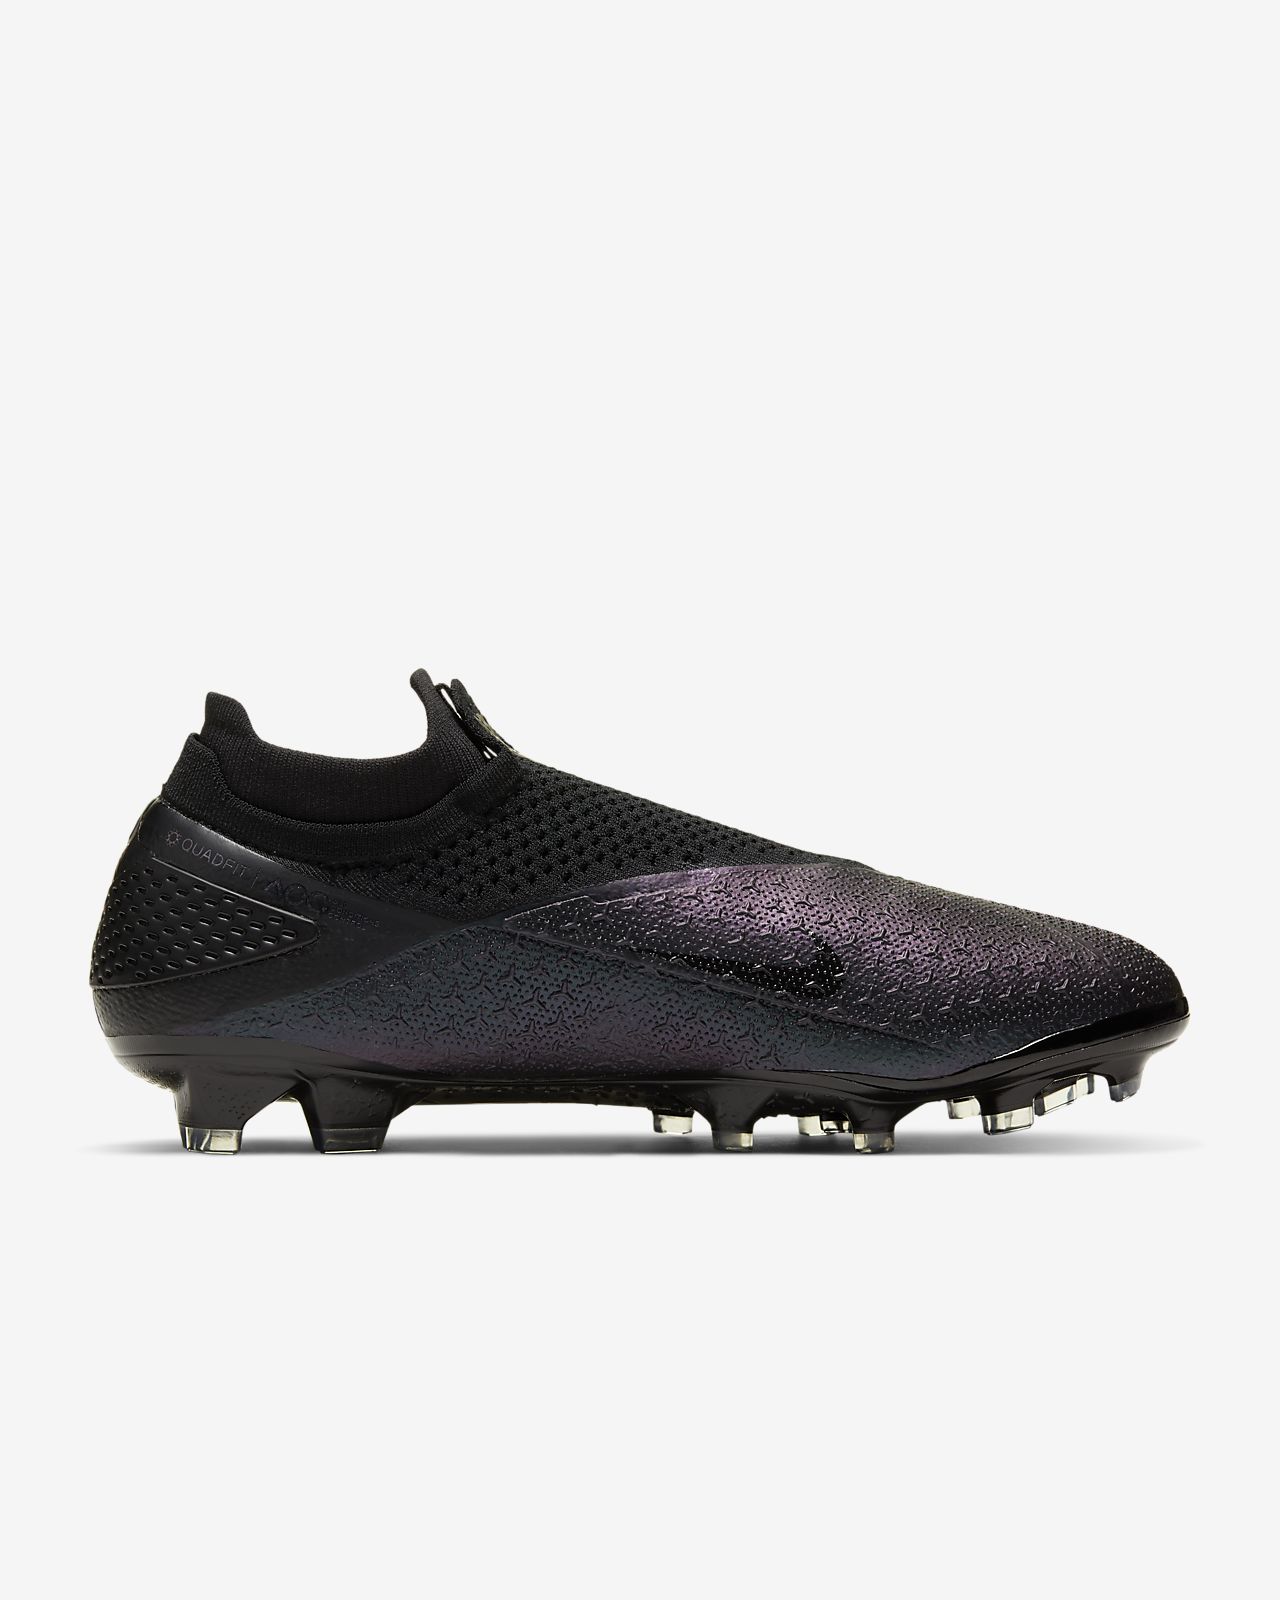 White Gold Nike Phantom Vision Limited Edition Boots .